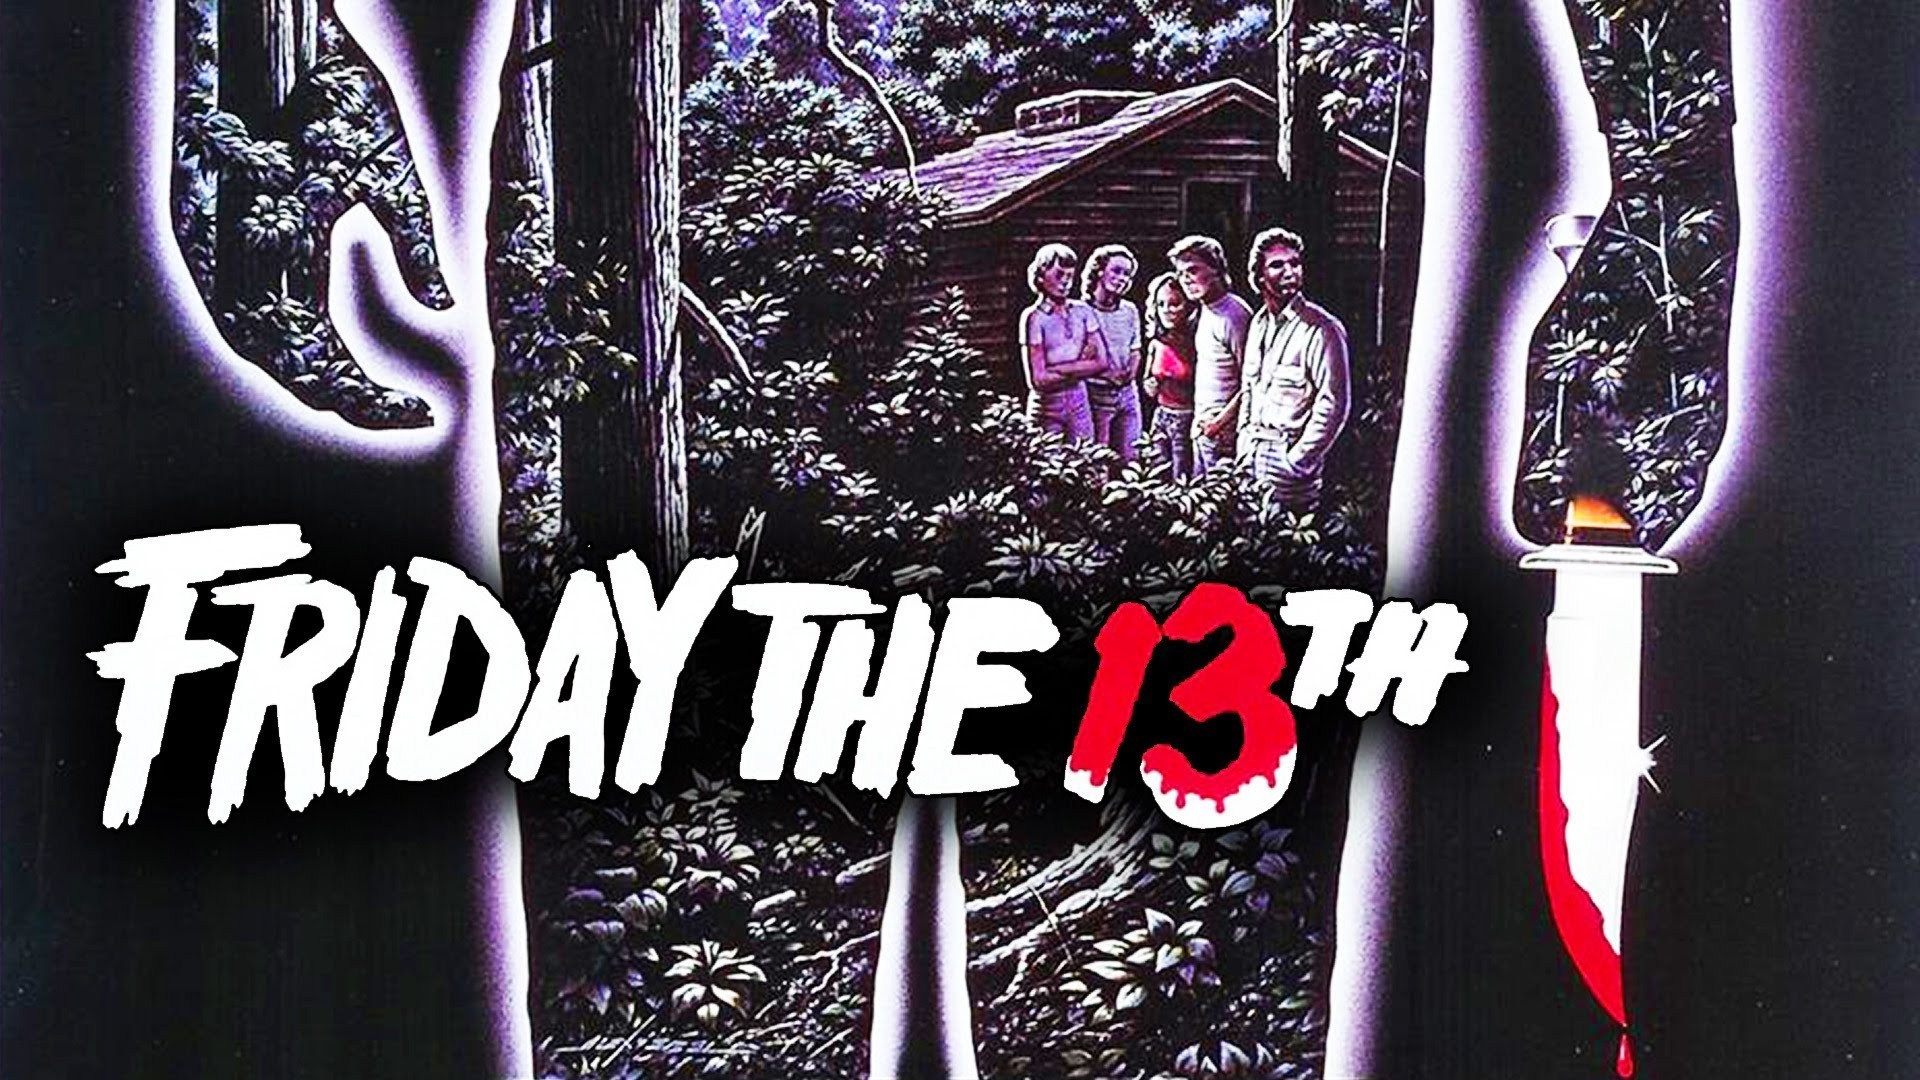 Friday the 13th (1980) - Grave Reviews - Horror Movie Reviews